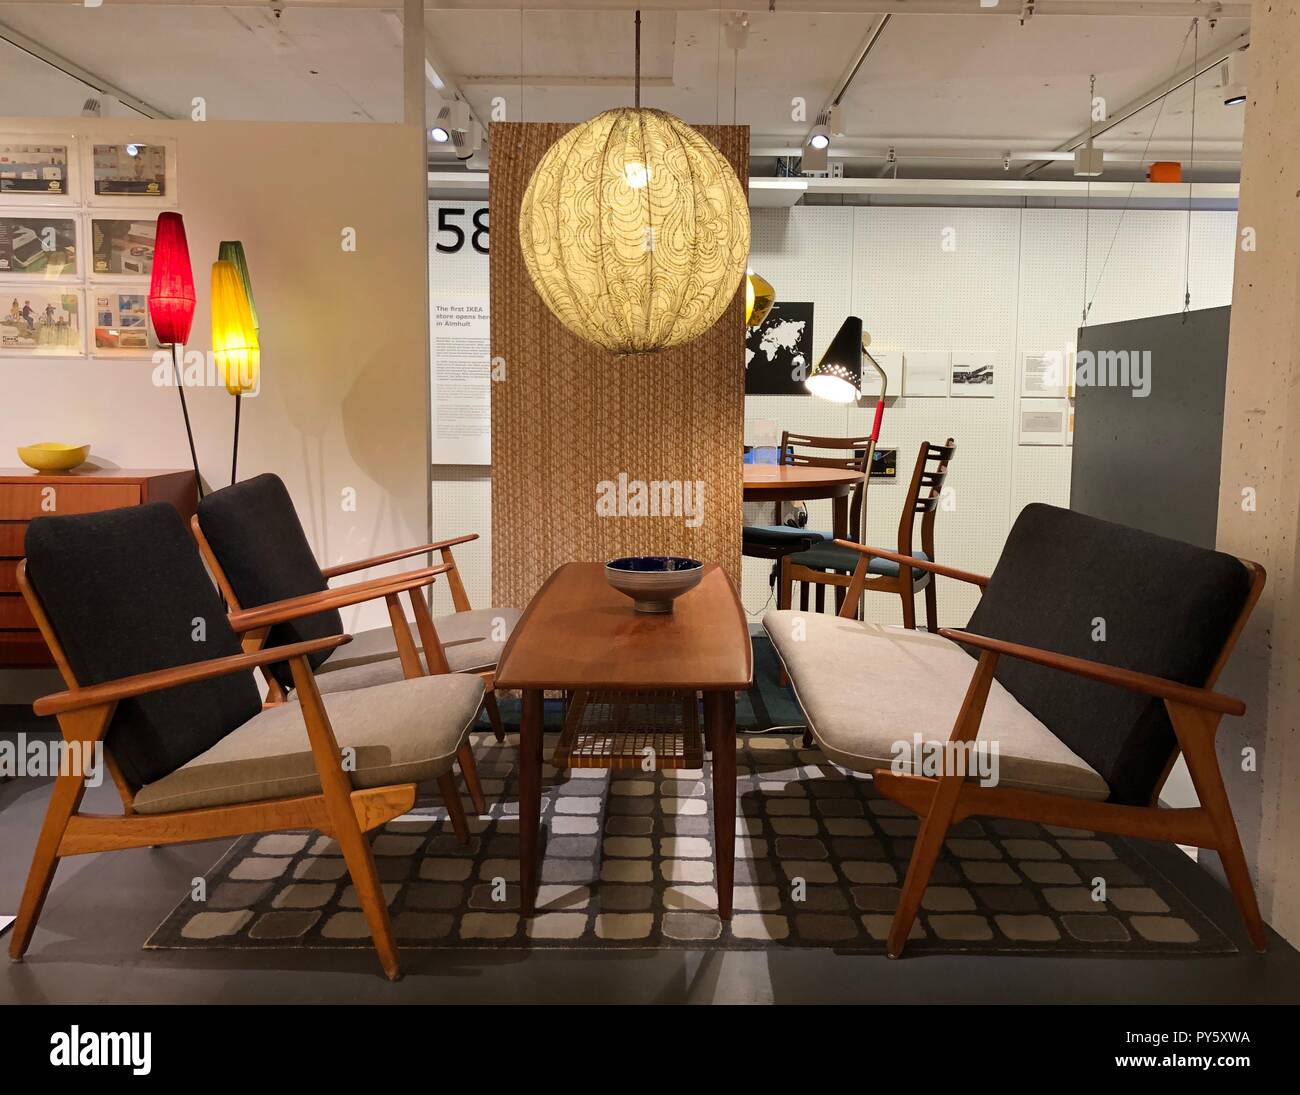 16 October 2018 Sweden Almhult Furniture Is Exhibited In The